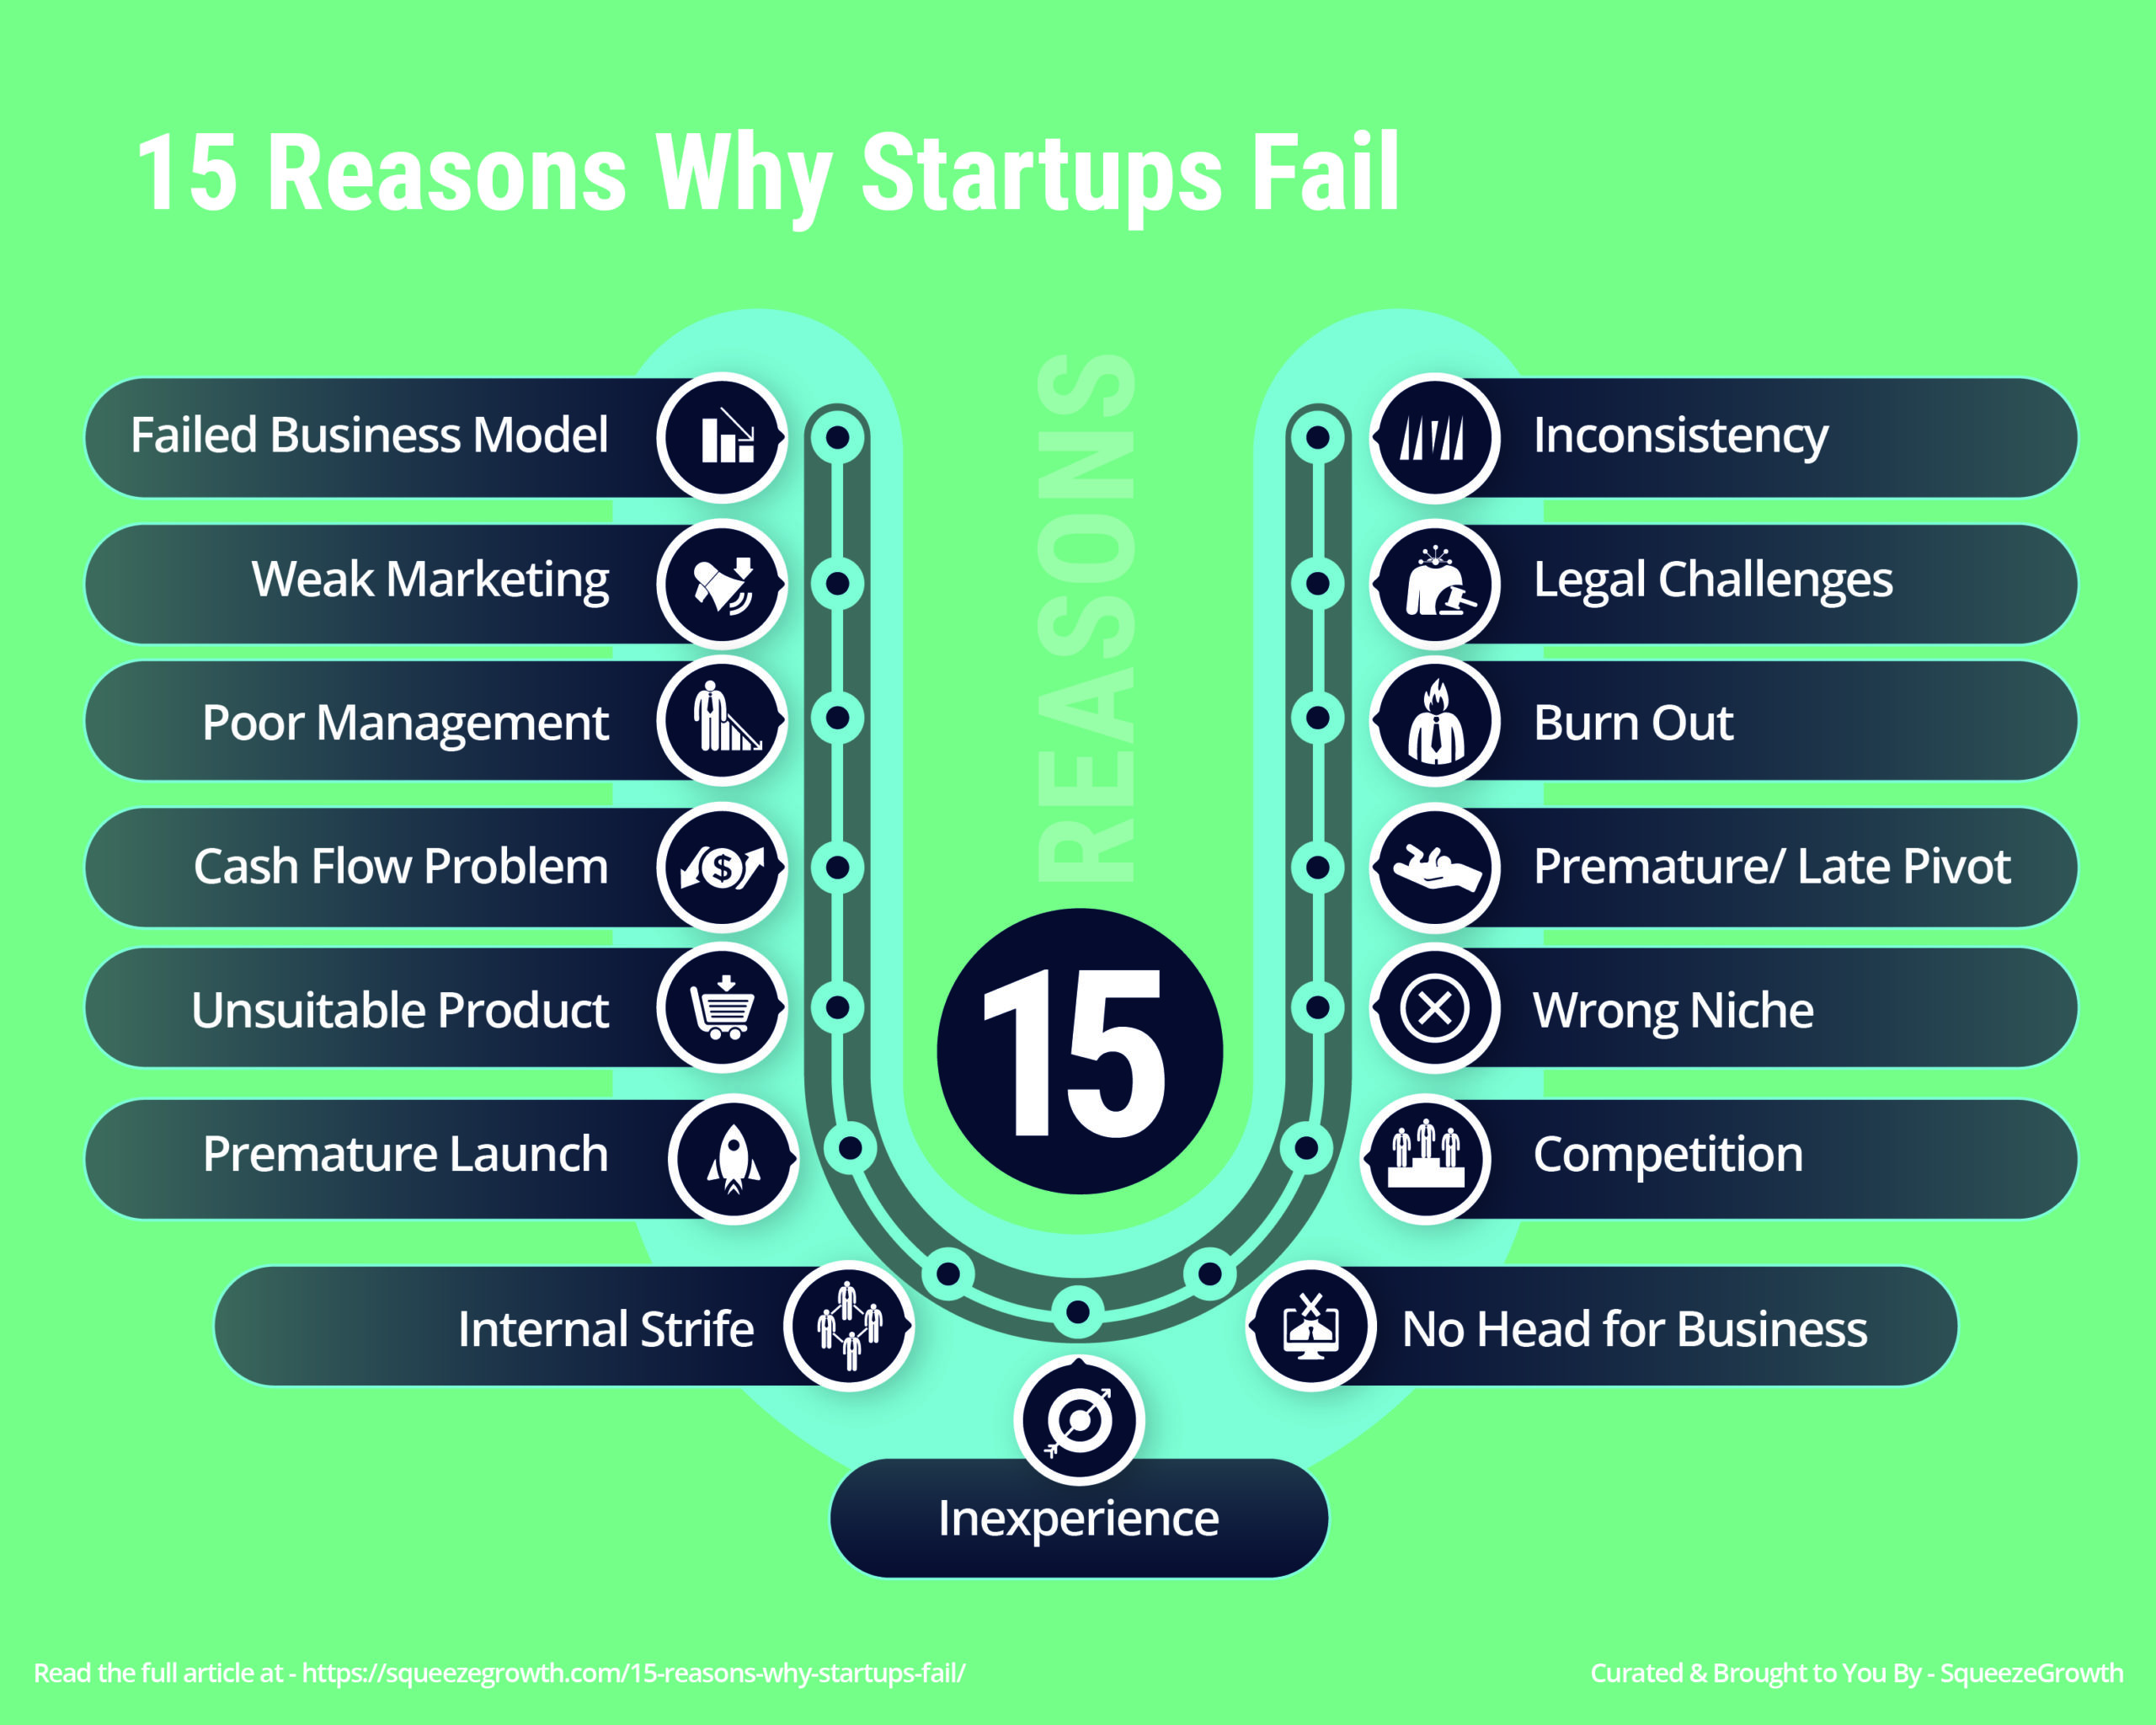 SqueezeGrowth Reasons why Startup fail infograph 750x600 KS 32 04 2021 01